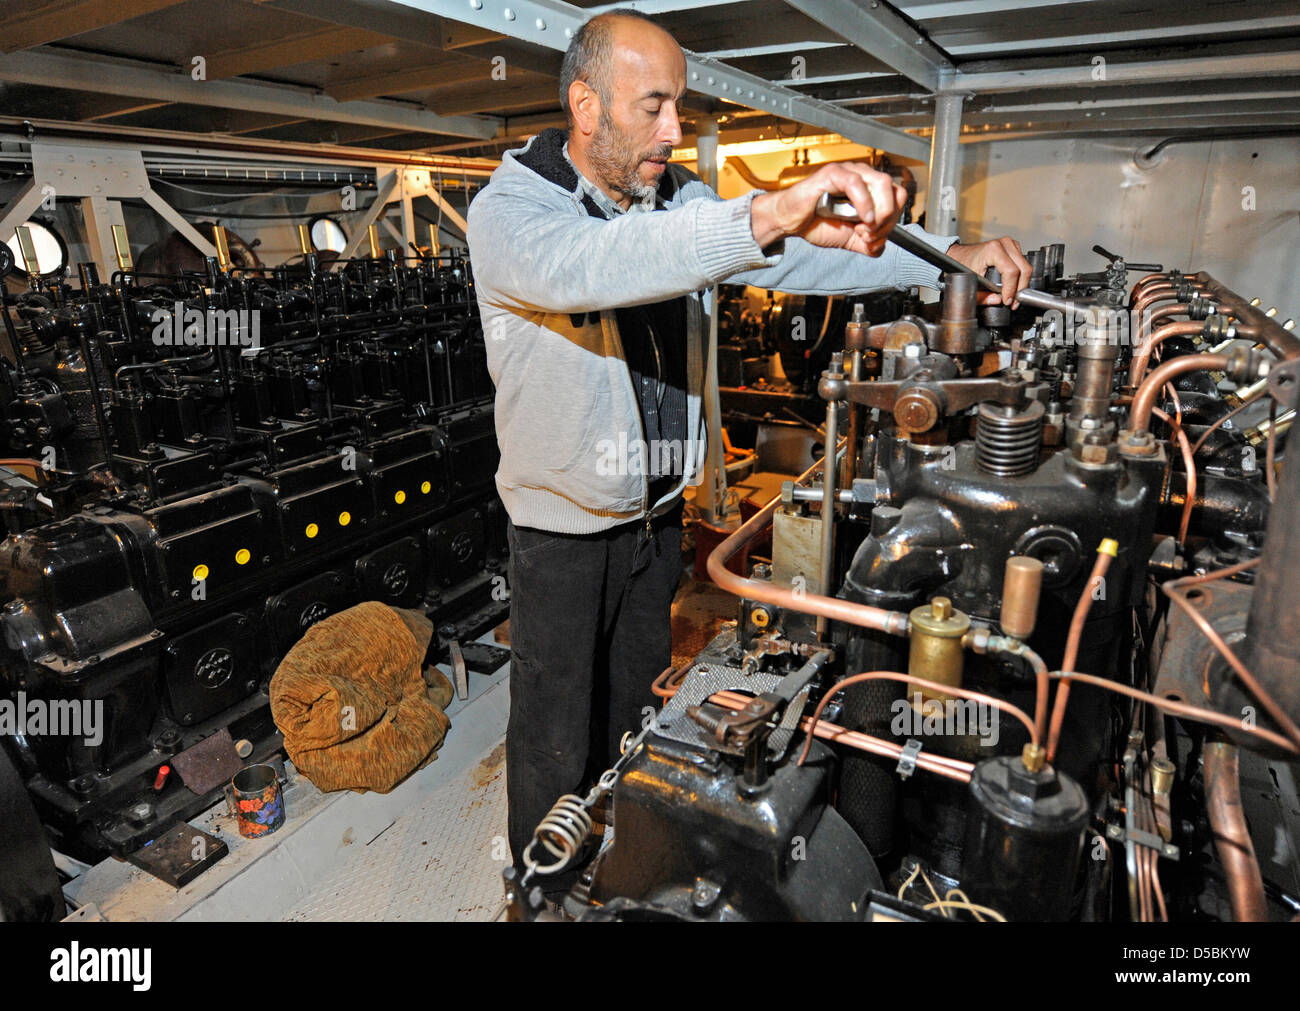 Mechanic Hans Galitzki works on the engine of Europe's first domestic car  ferry 'Konstanz' in Constance, Germany, 08 September 2010. The renovation  has been carried on by the club 'Save the Meersburg